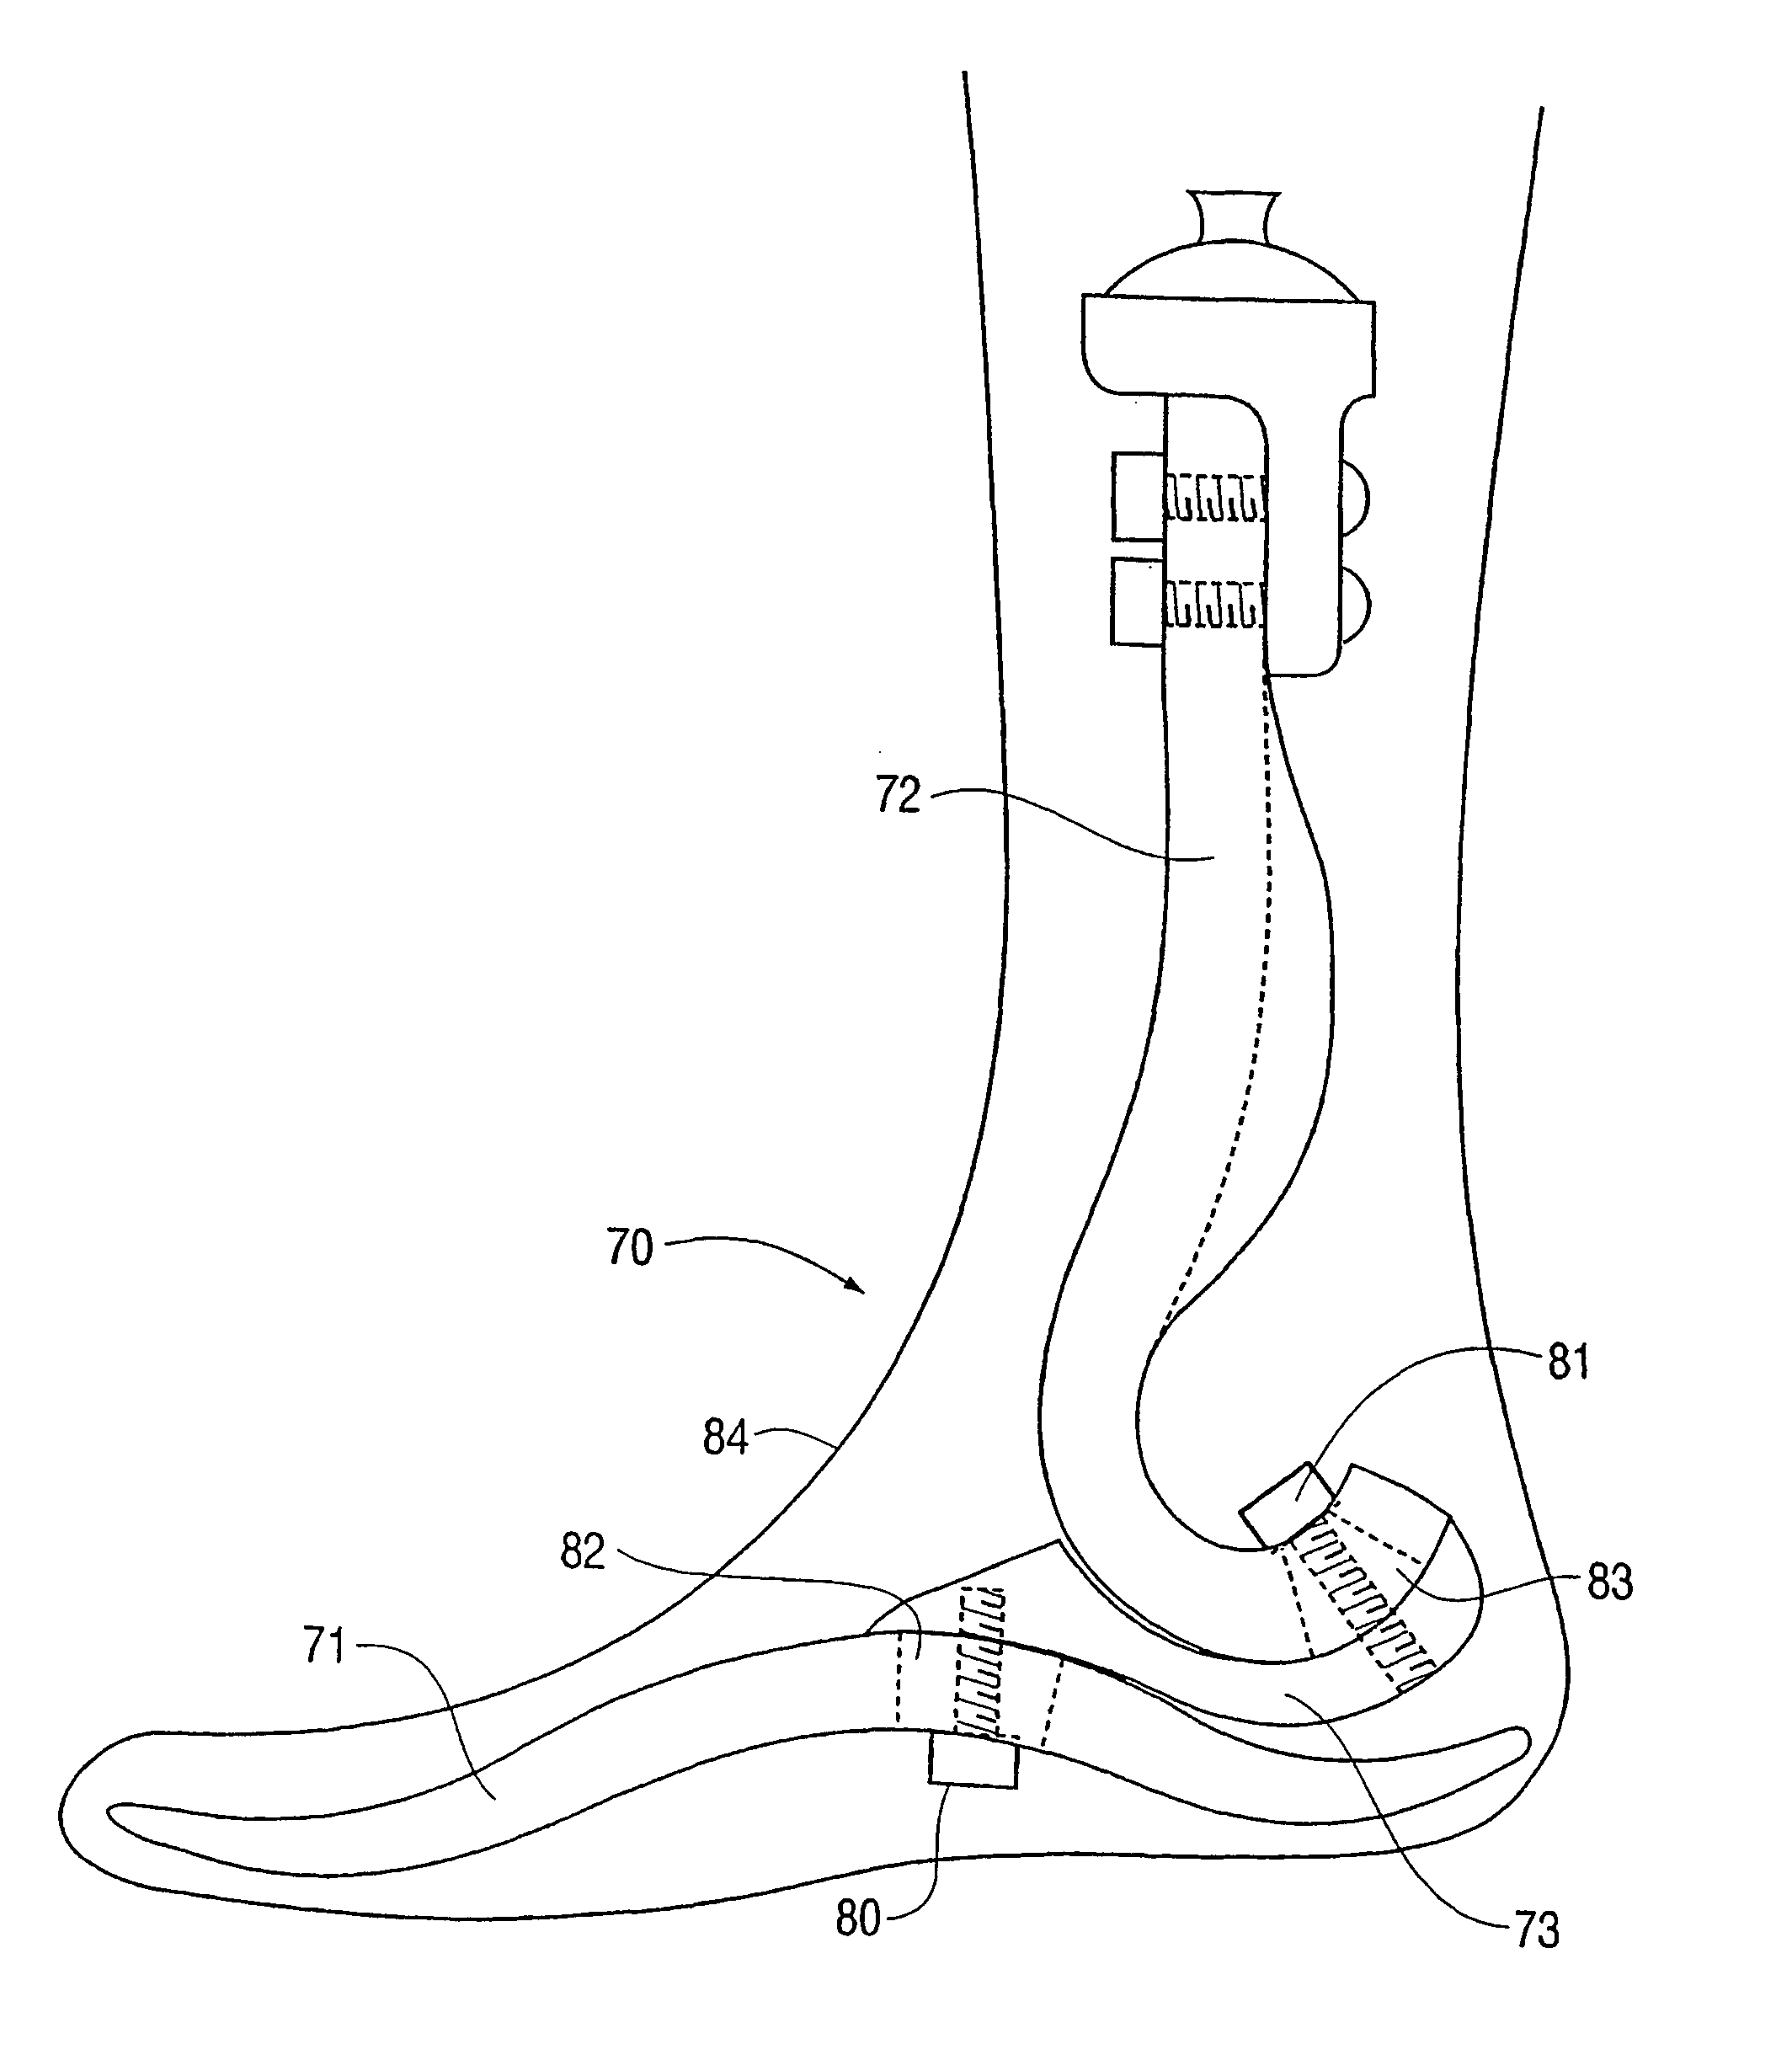 Prosthetic foot with tunable performance